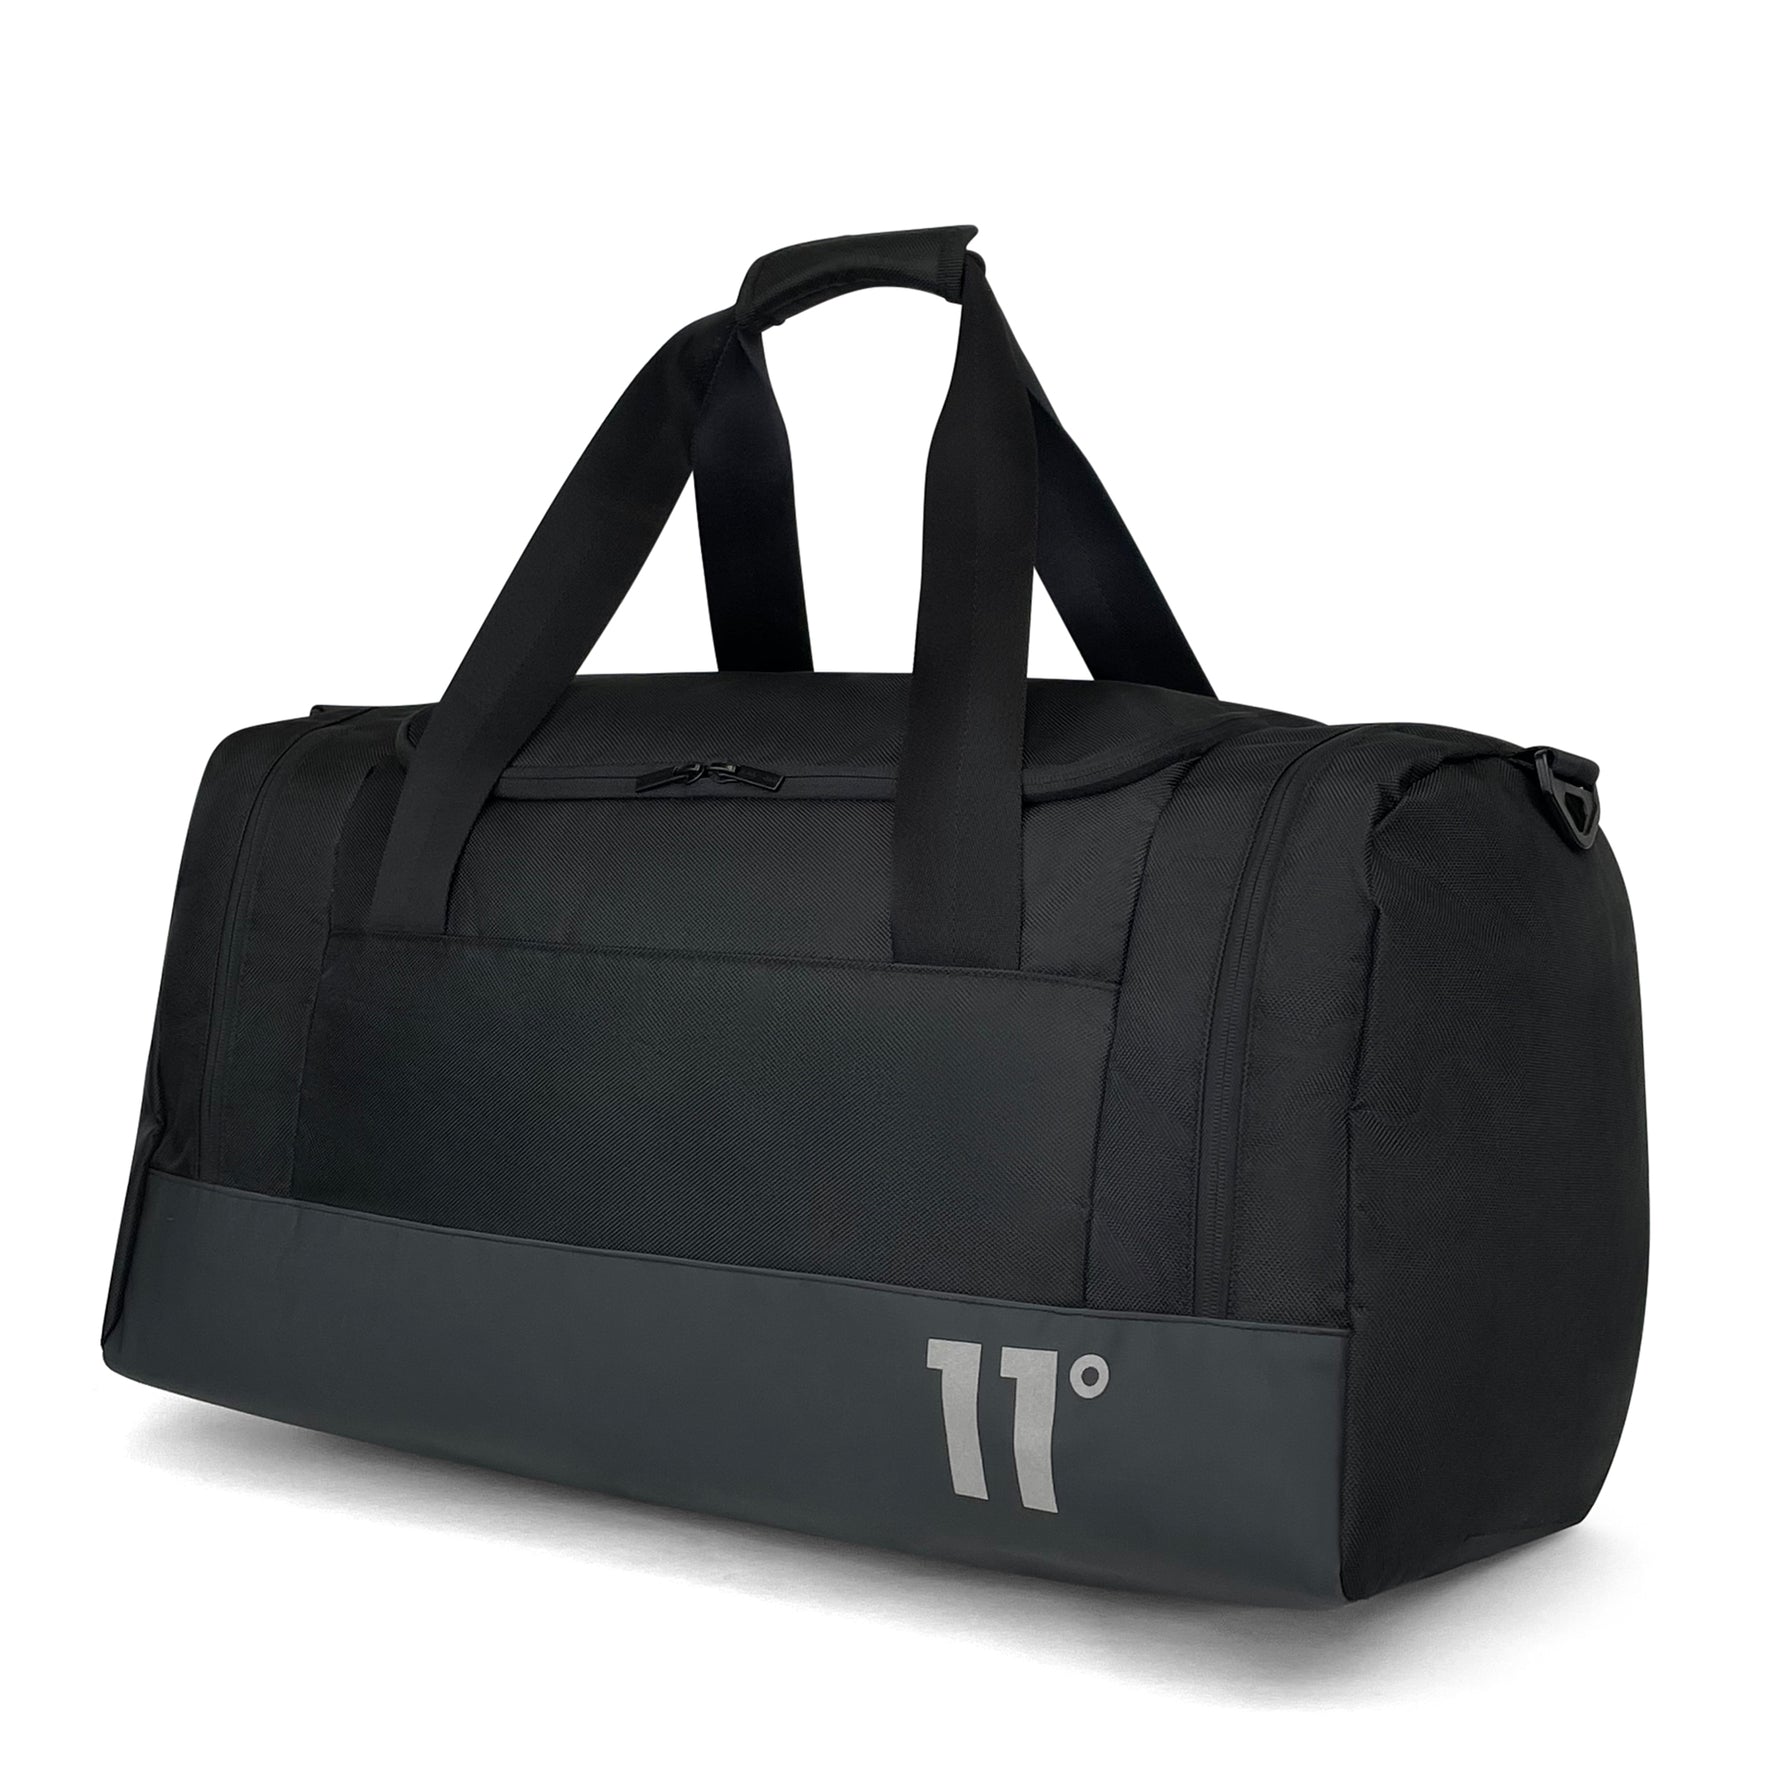 Activate Holdall Duffle Bag-Duffle Bags-11 Degrees-Black-SchoolBagsAndStuff